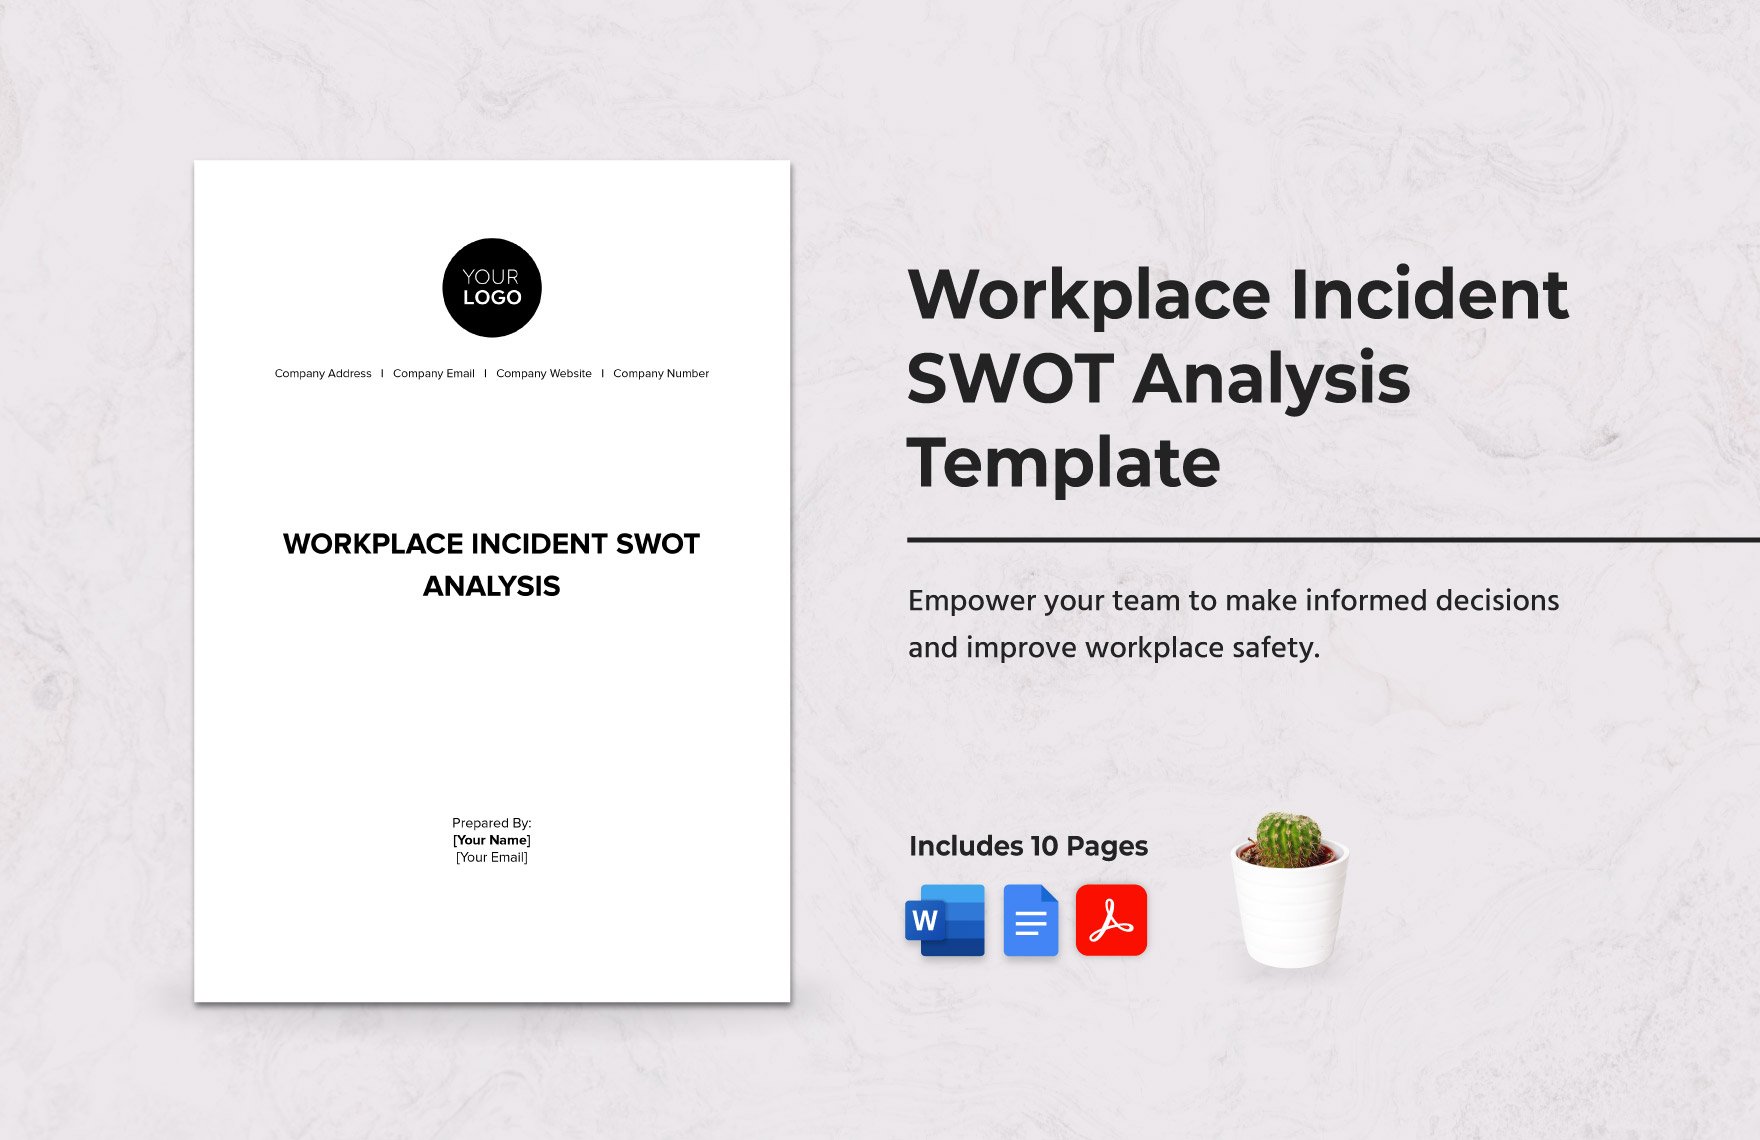 Workplace Incident SWOT Analysis Template